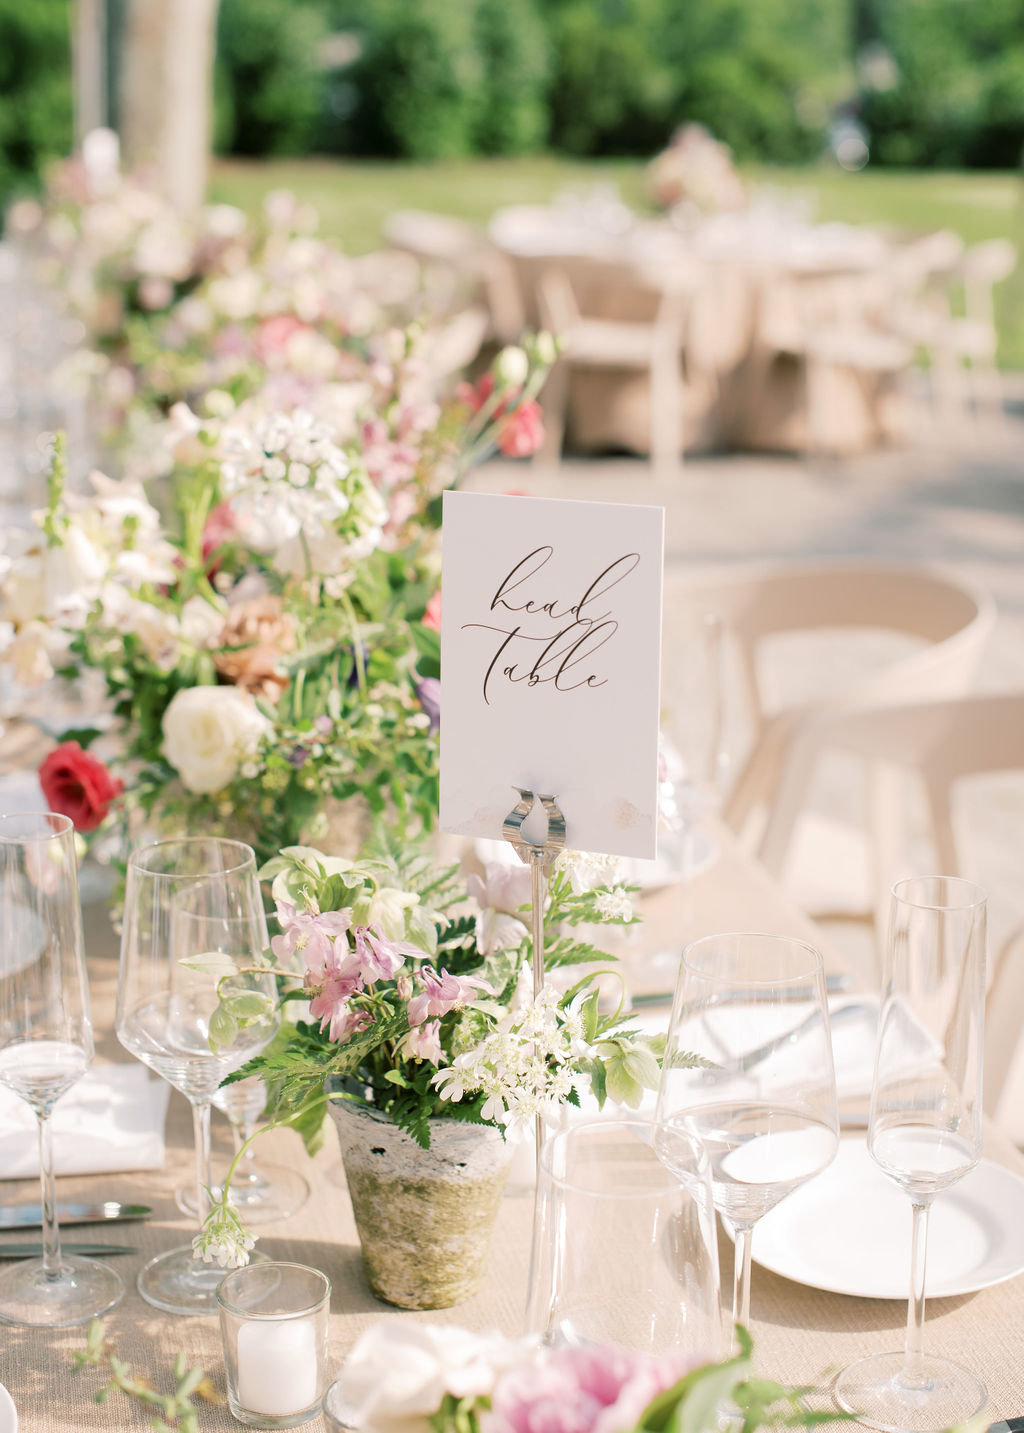 Nashville Wedding Head Table florals designed by Gradient and Hue